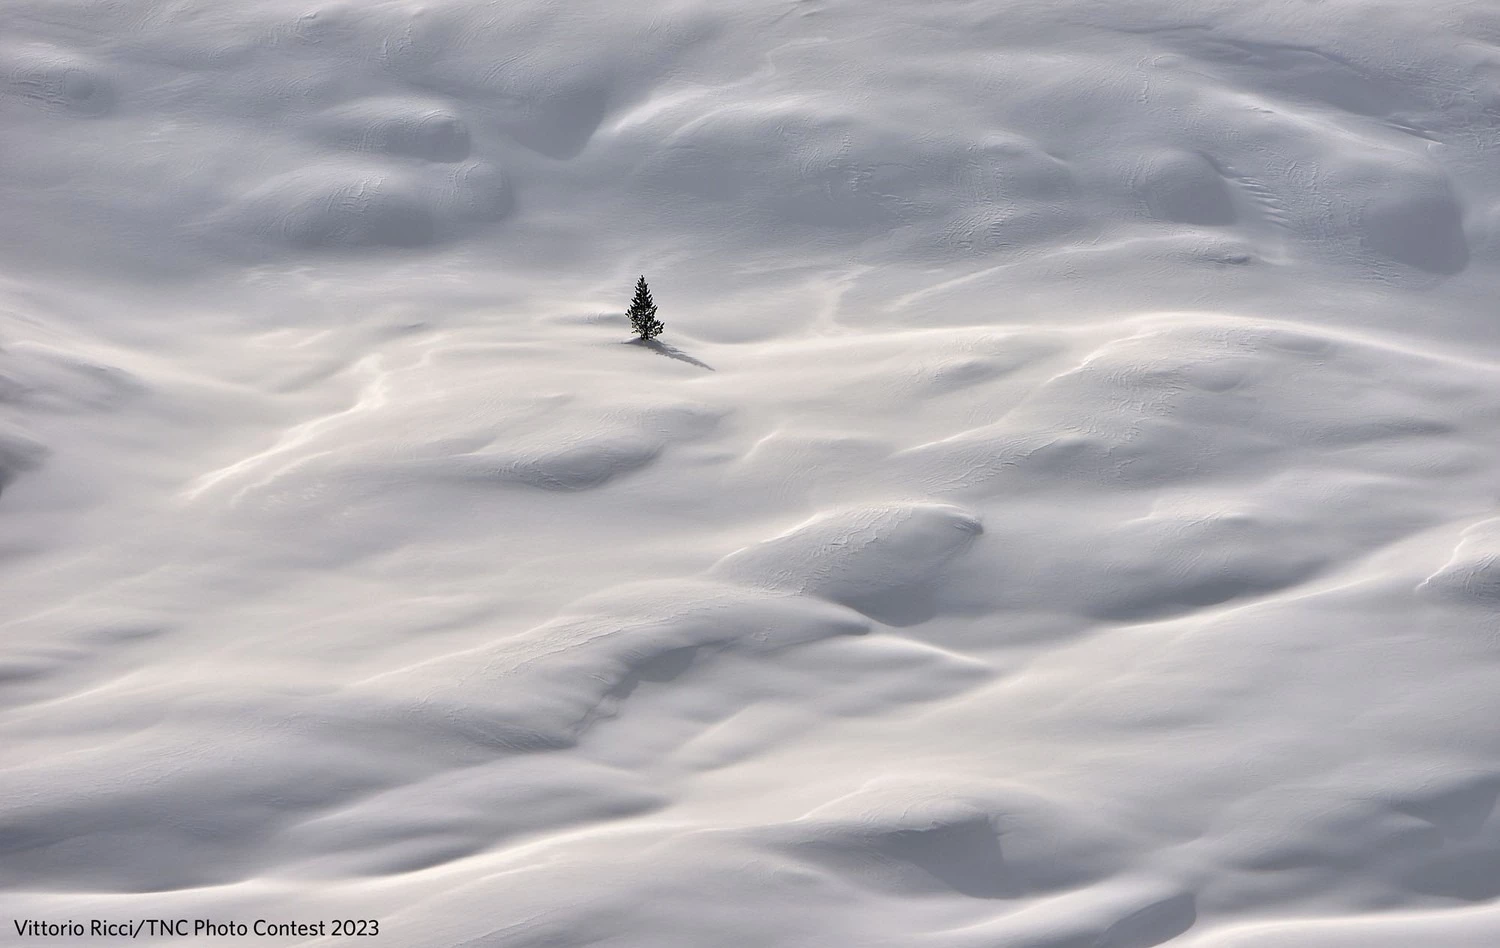 Lost in Snow Waves - Second Place, Plants & Fungi